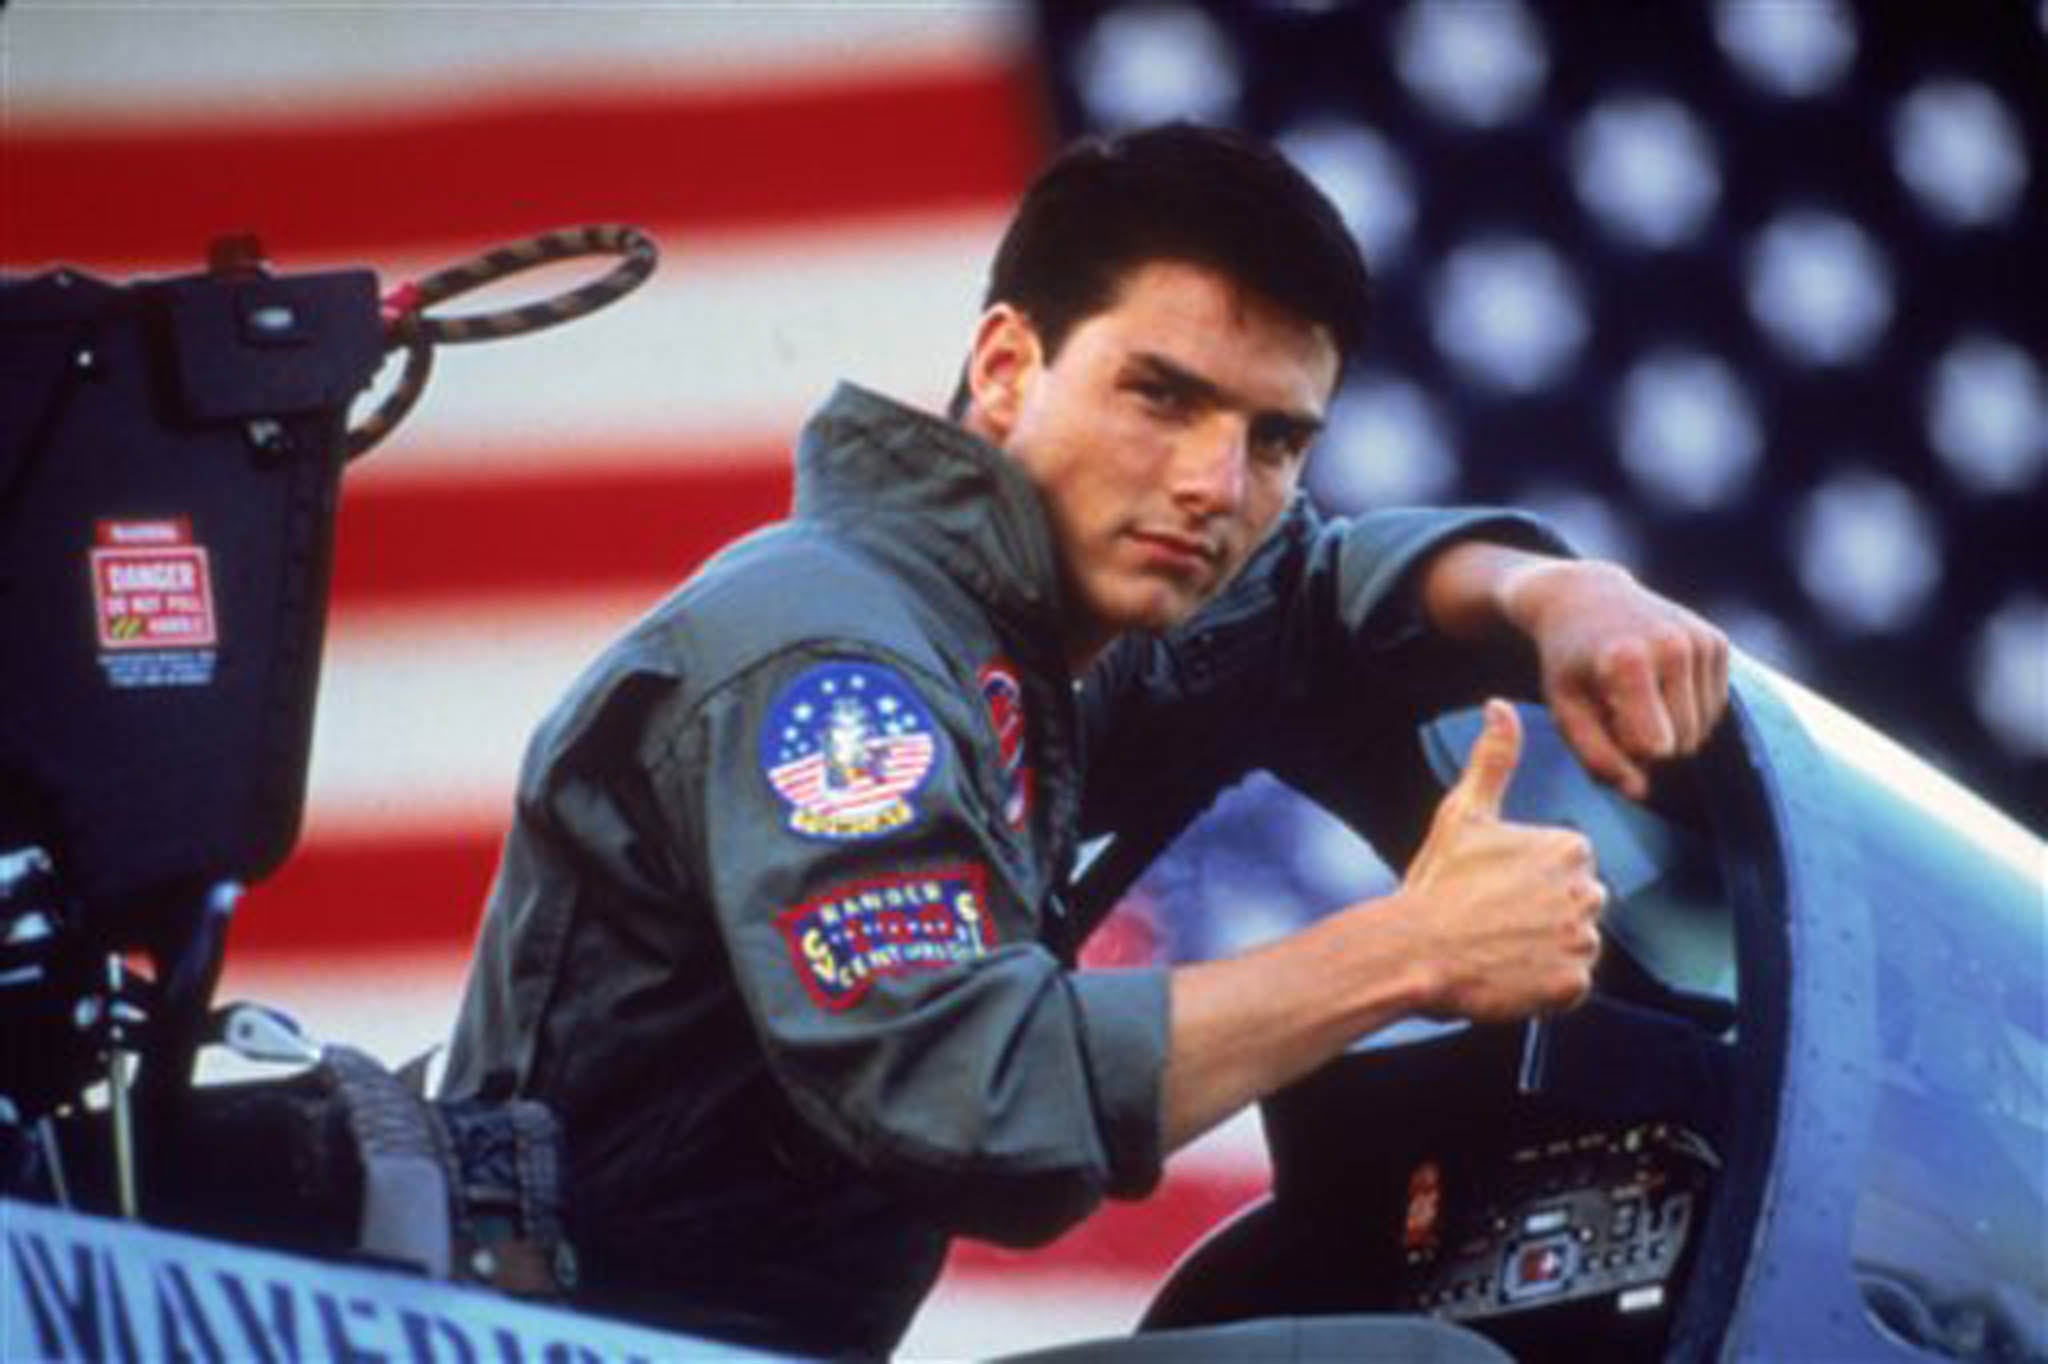 It's not the Baby Boomers who are to blame for Brexit, it's the Top Gun